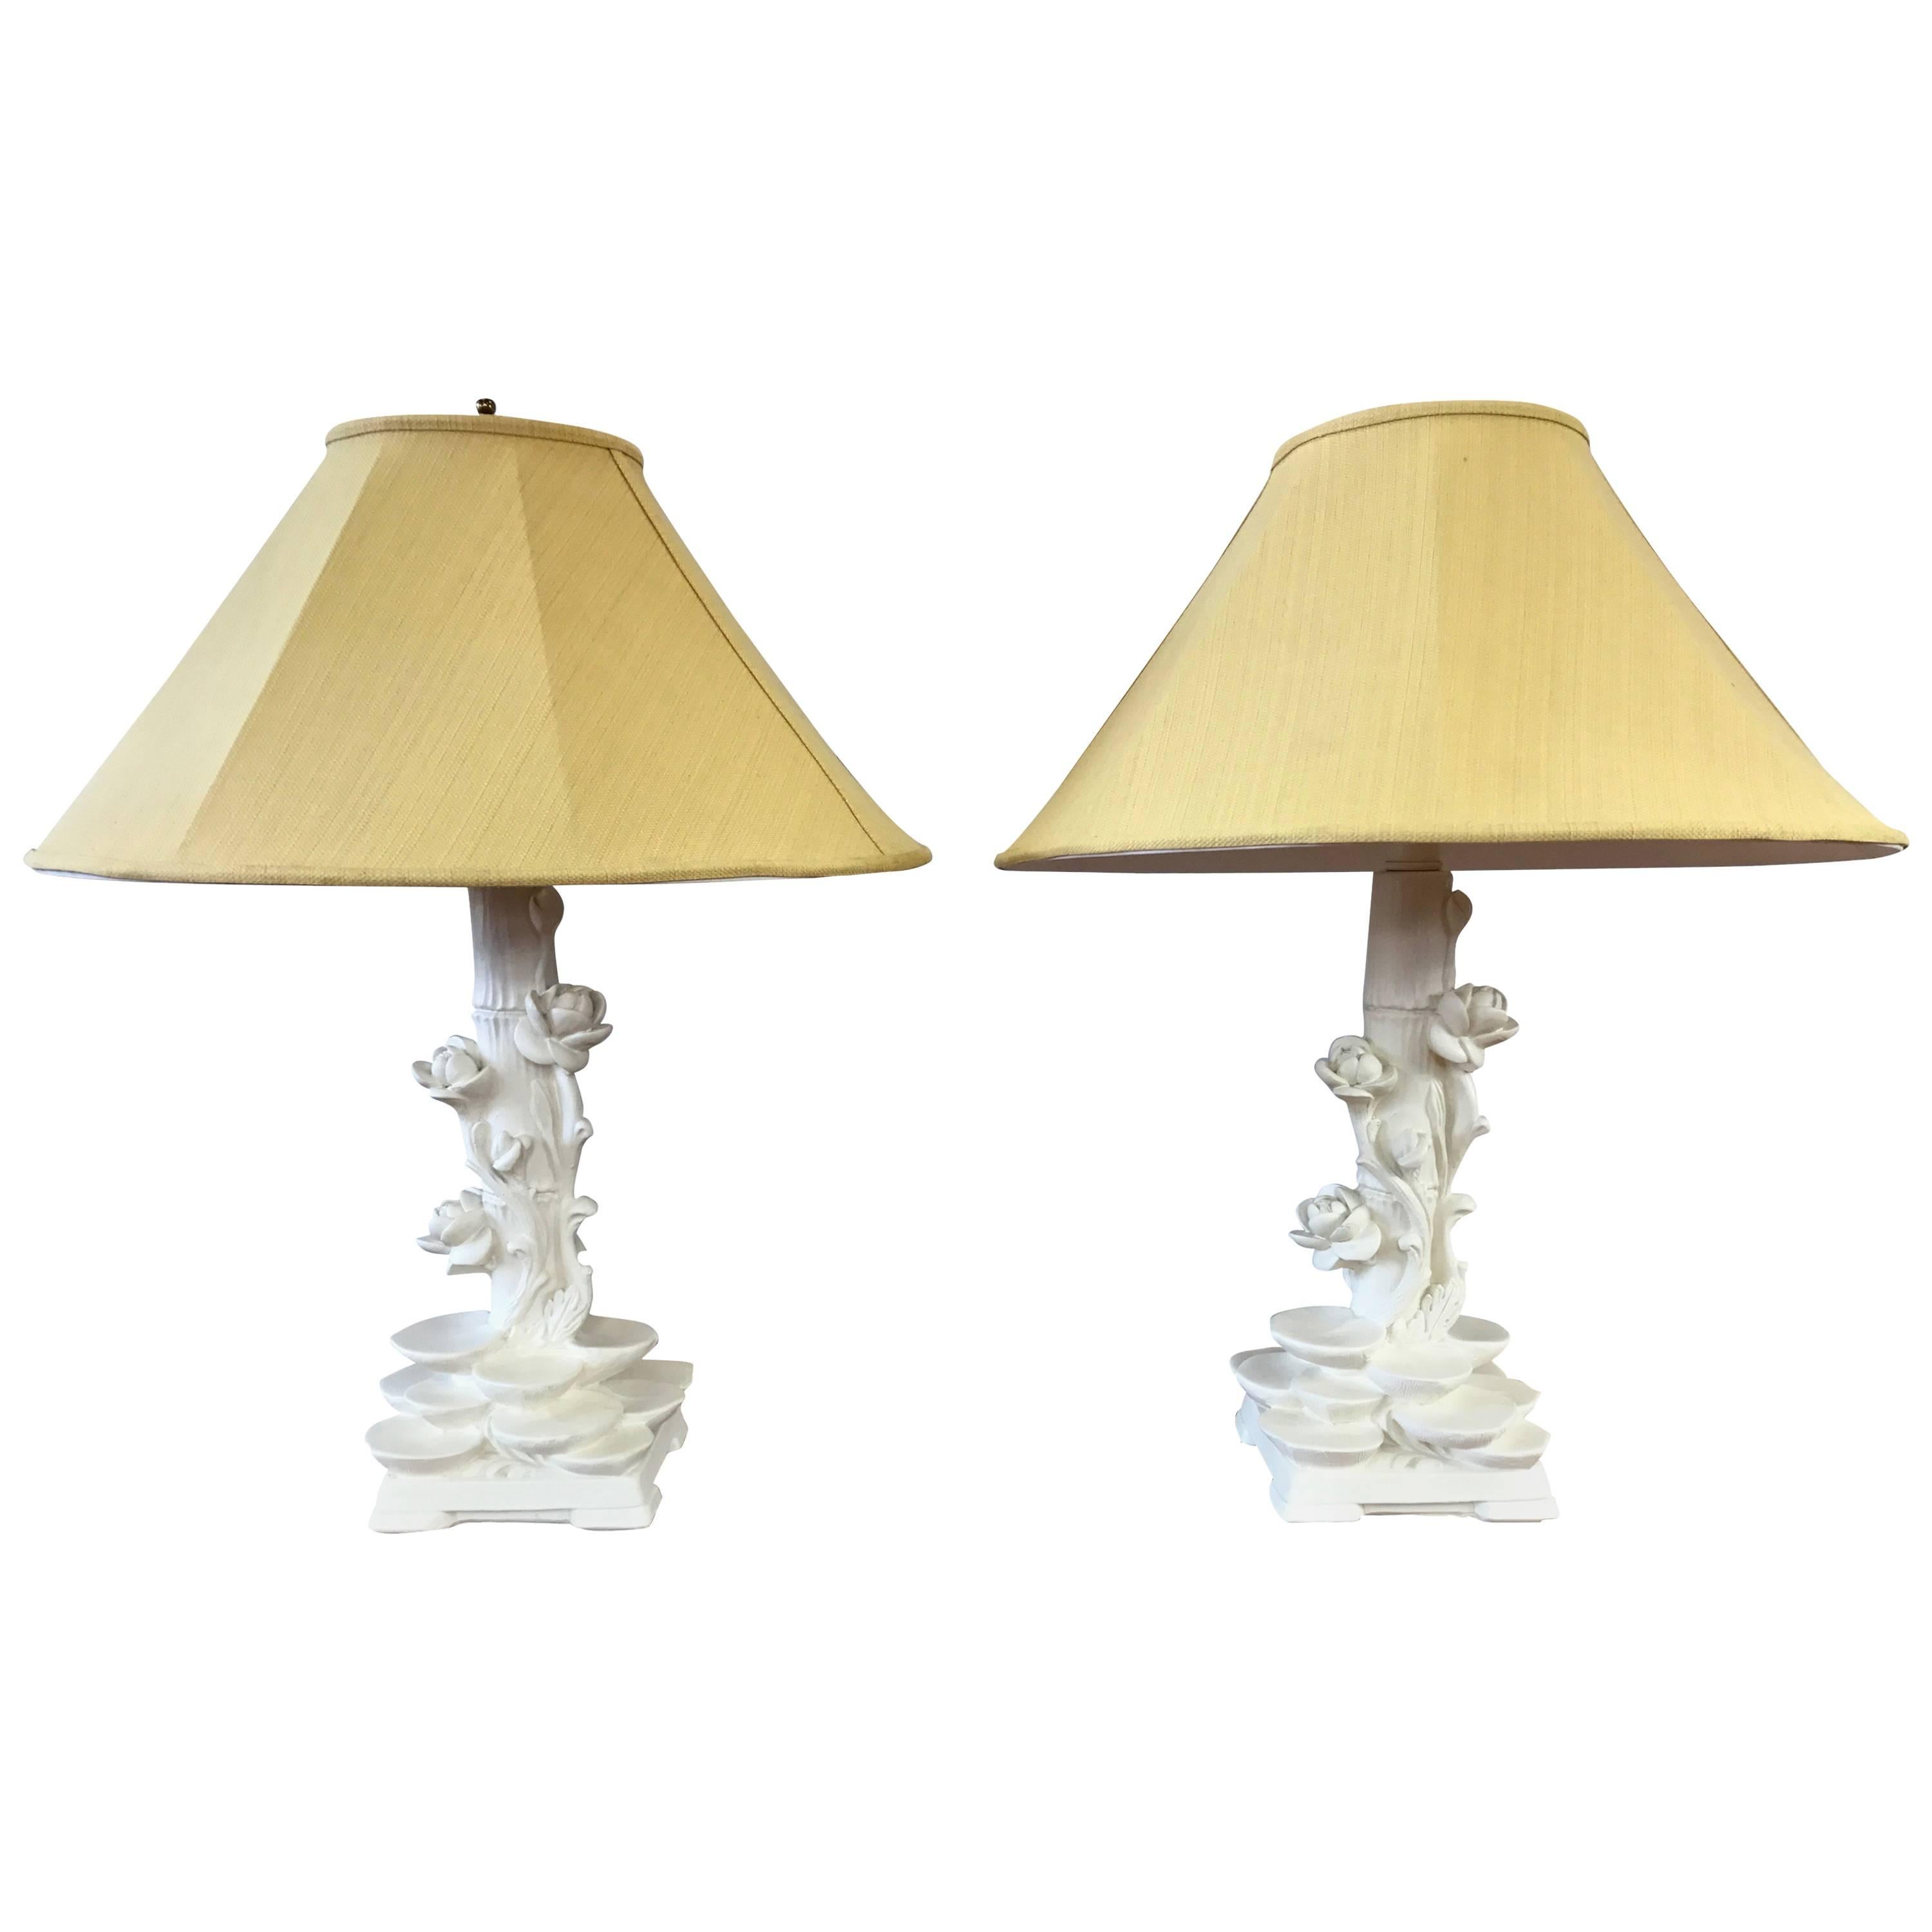 Pair of Pieri Chinoiserie Table Lamps in the Style of Serge Roche